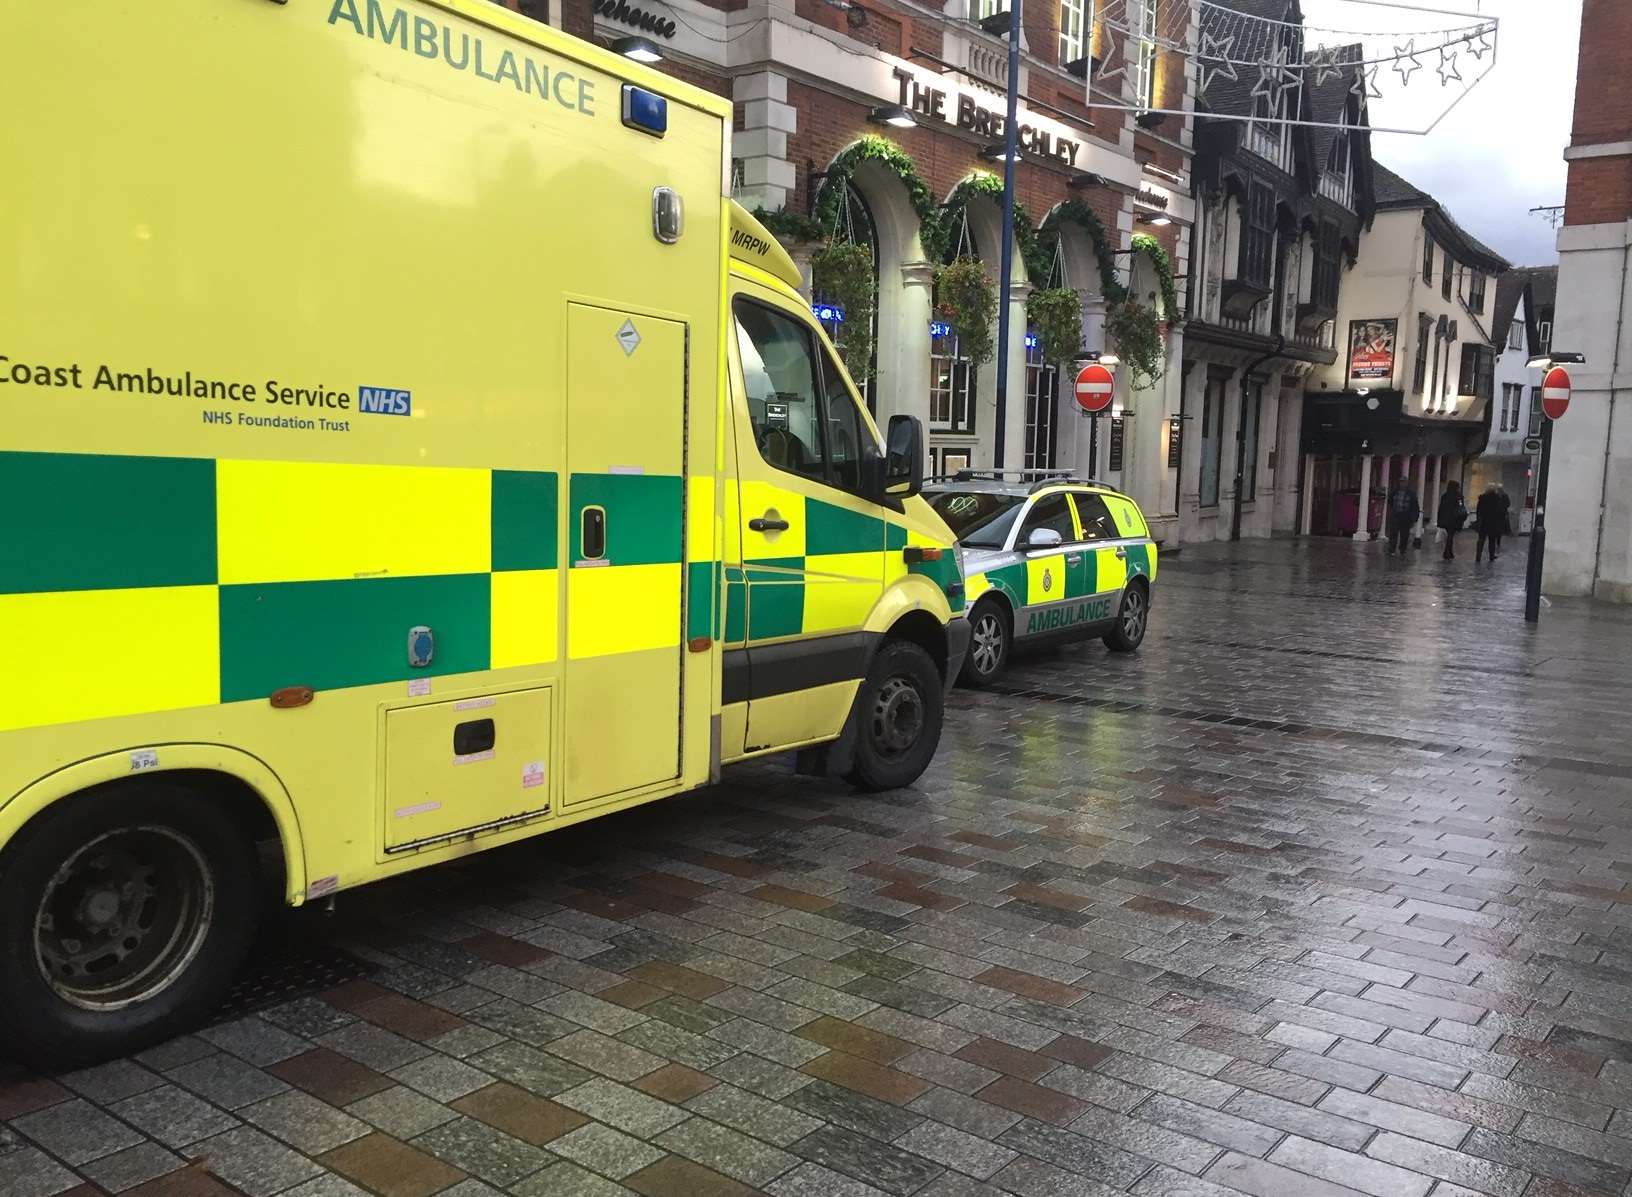 A first responder car and an ambulance were sent to The Brenchley.